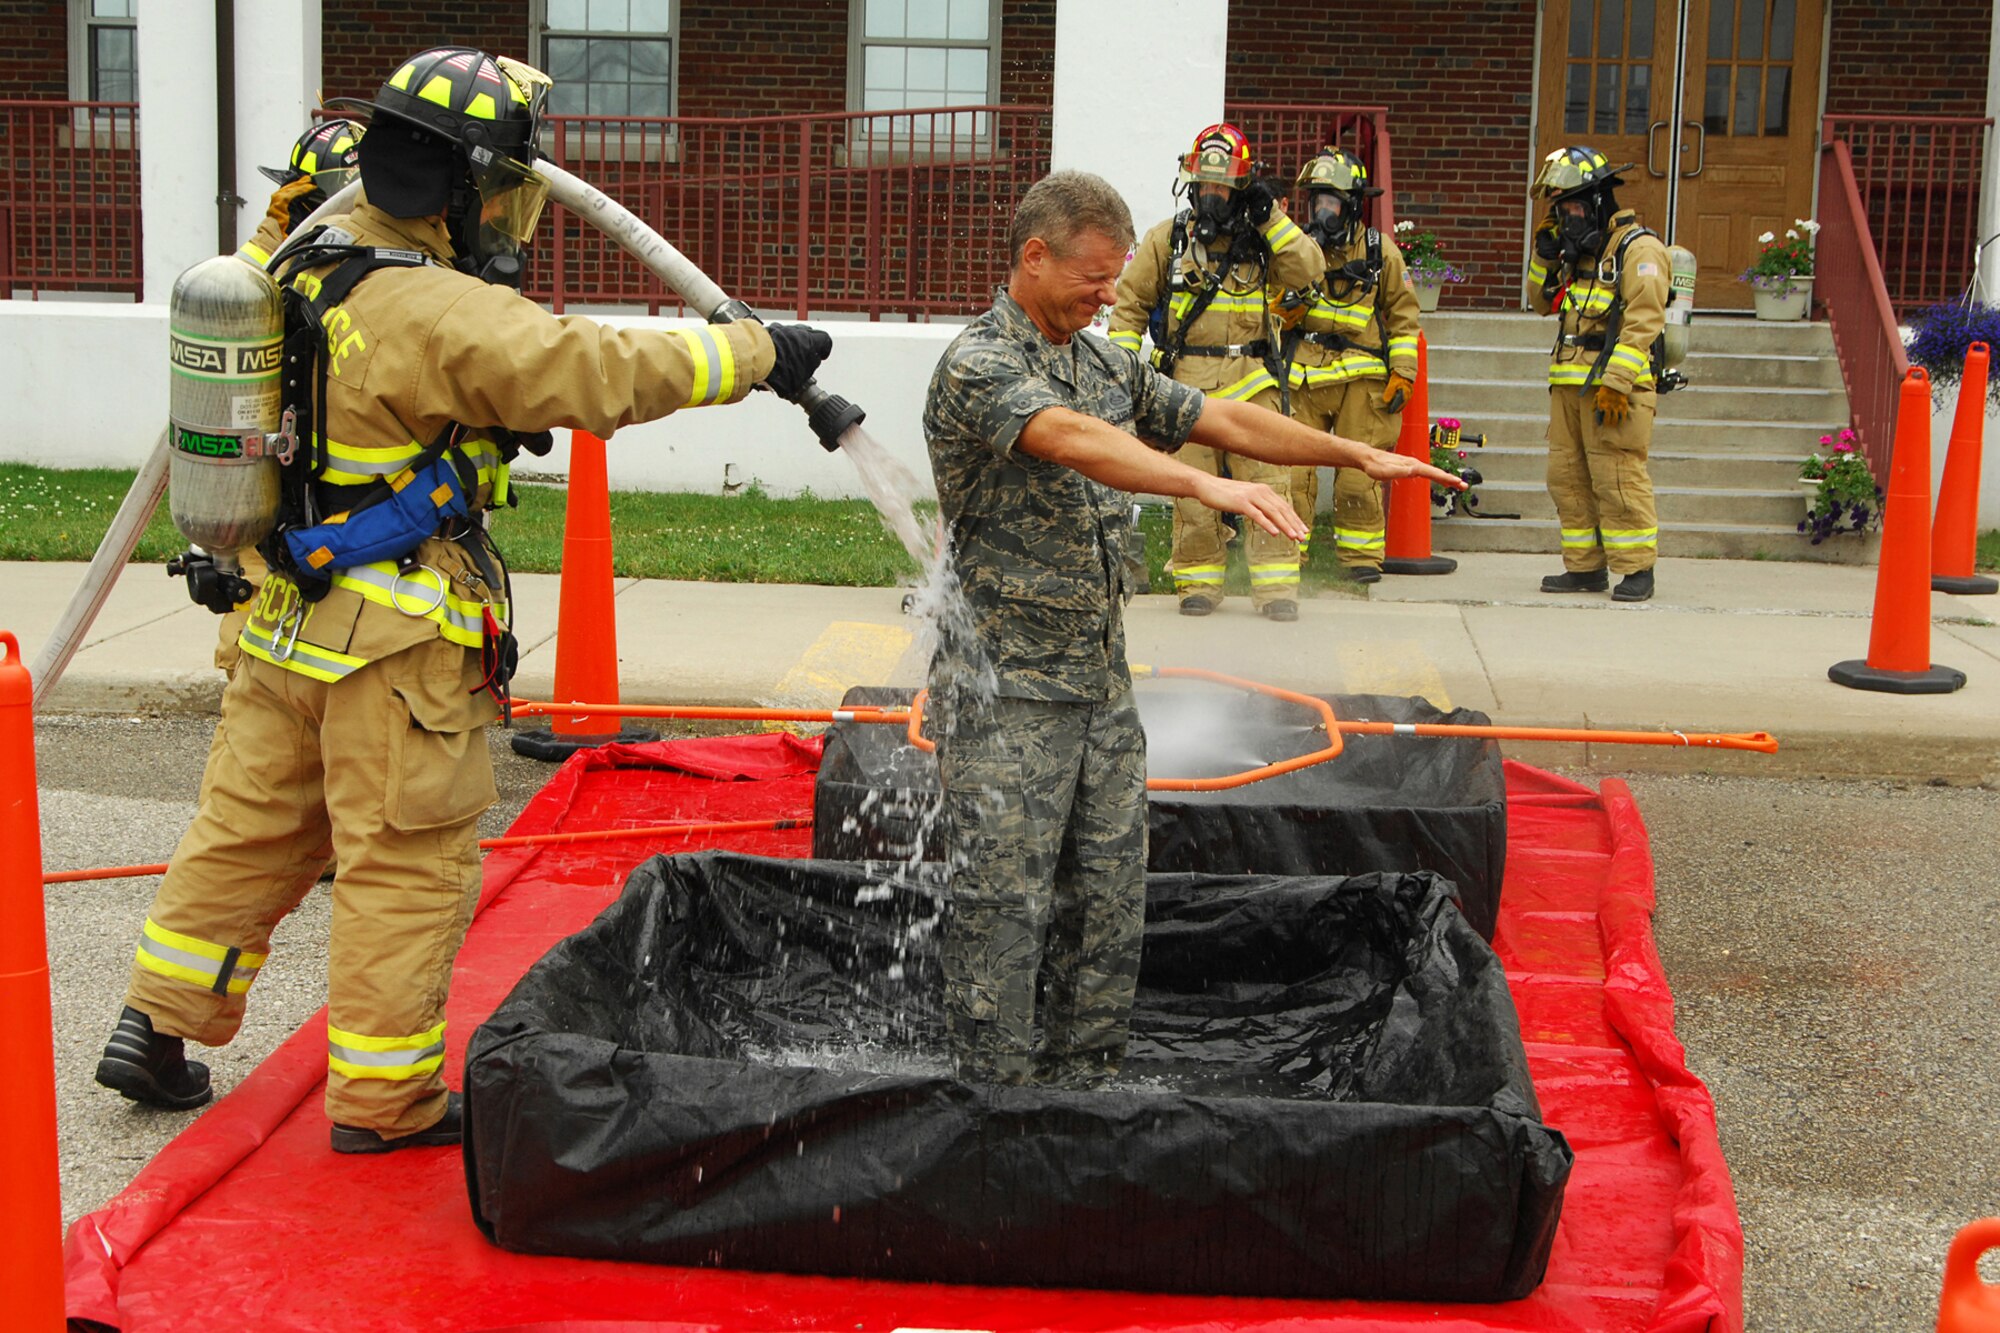 The 127th Wing, Michigan Air National Guard, participated in a week-long joint emergency management training exercise called Vigilant Guard 2010.  On Tuesday, June 15, after reports of suspicious packages being sent through the mail, 127th Security Forces personnel evacuated facilities while the Selfridge ANG Base Fire Department HAZMAT team responded to search for and rescue mock victims of a possible anthrax contamination.  The team set up a field decontamination station through which victims, firefighters, and found suspicious samples were processed. USAF Photo by John S. Swanson (Released)(100615)